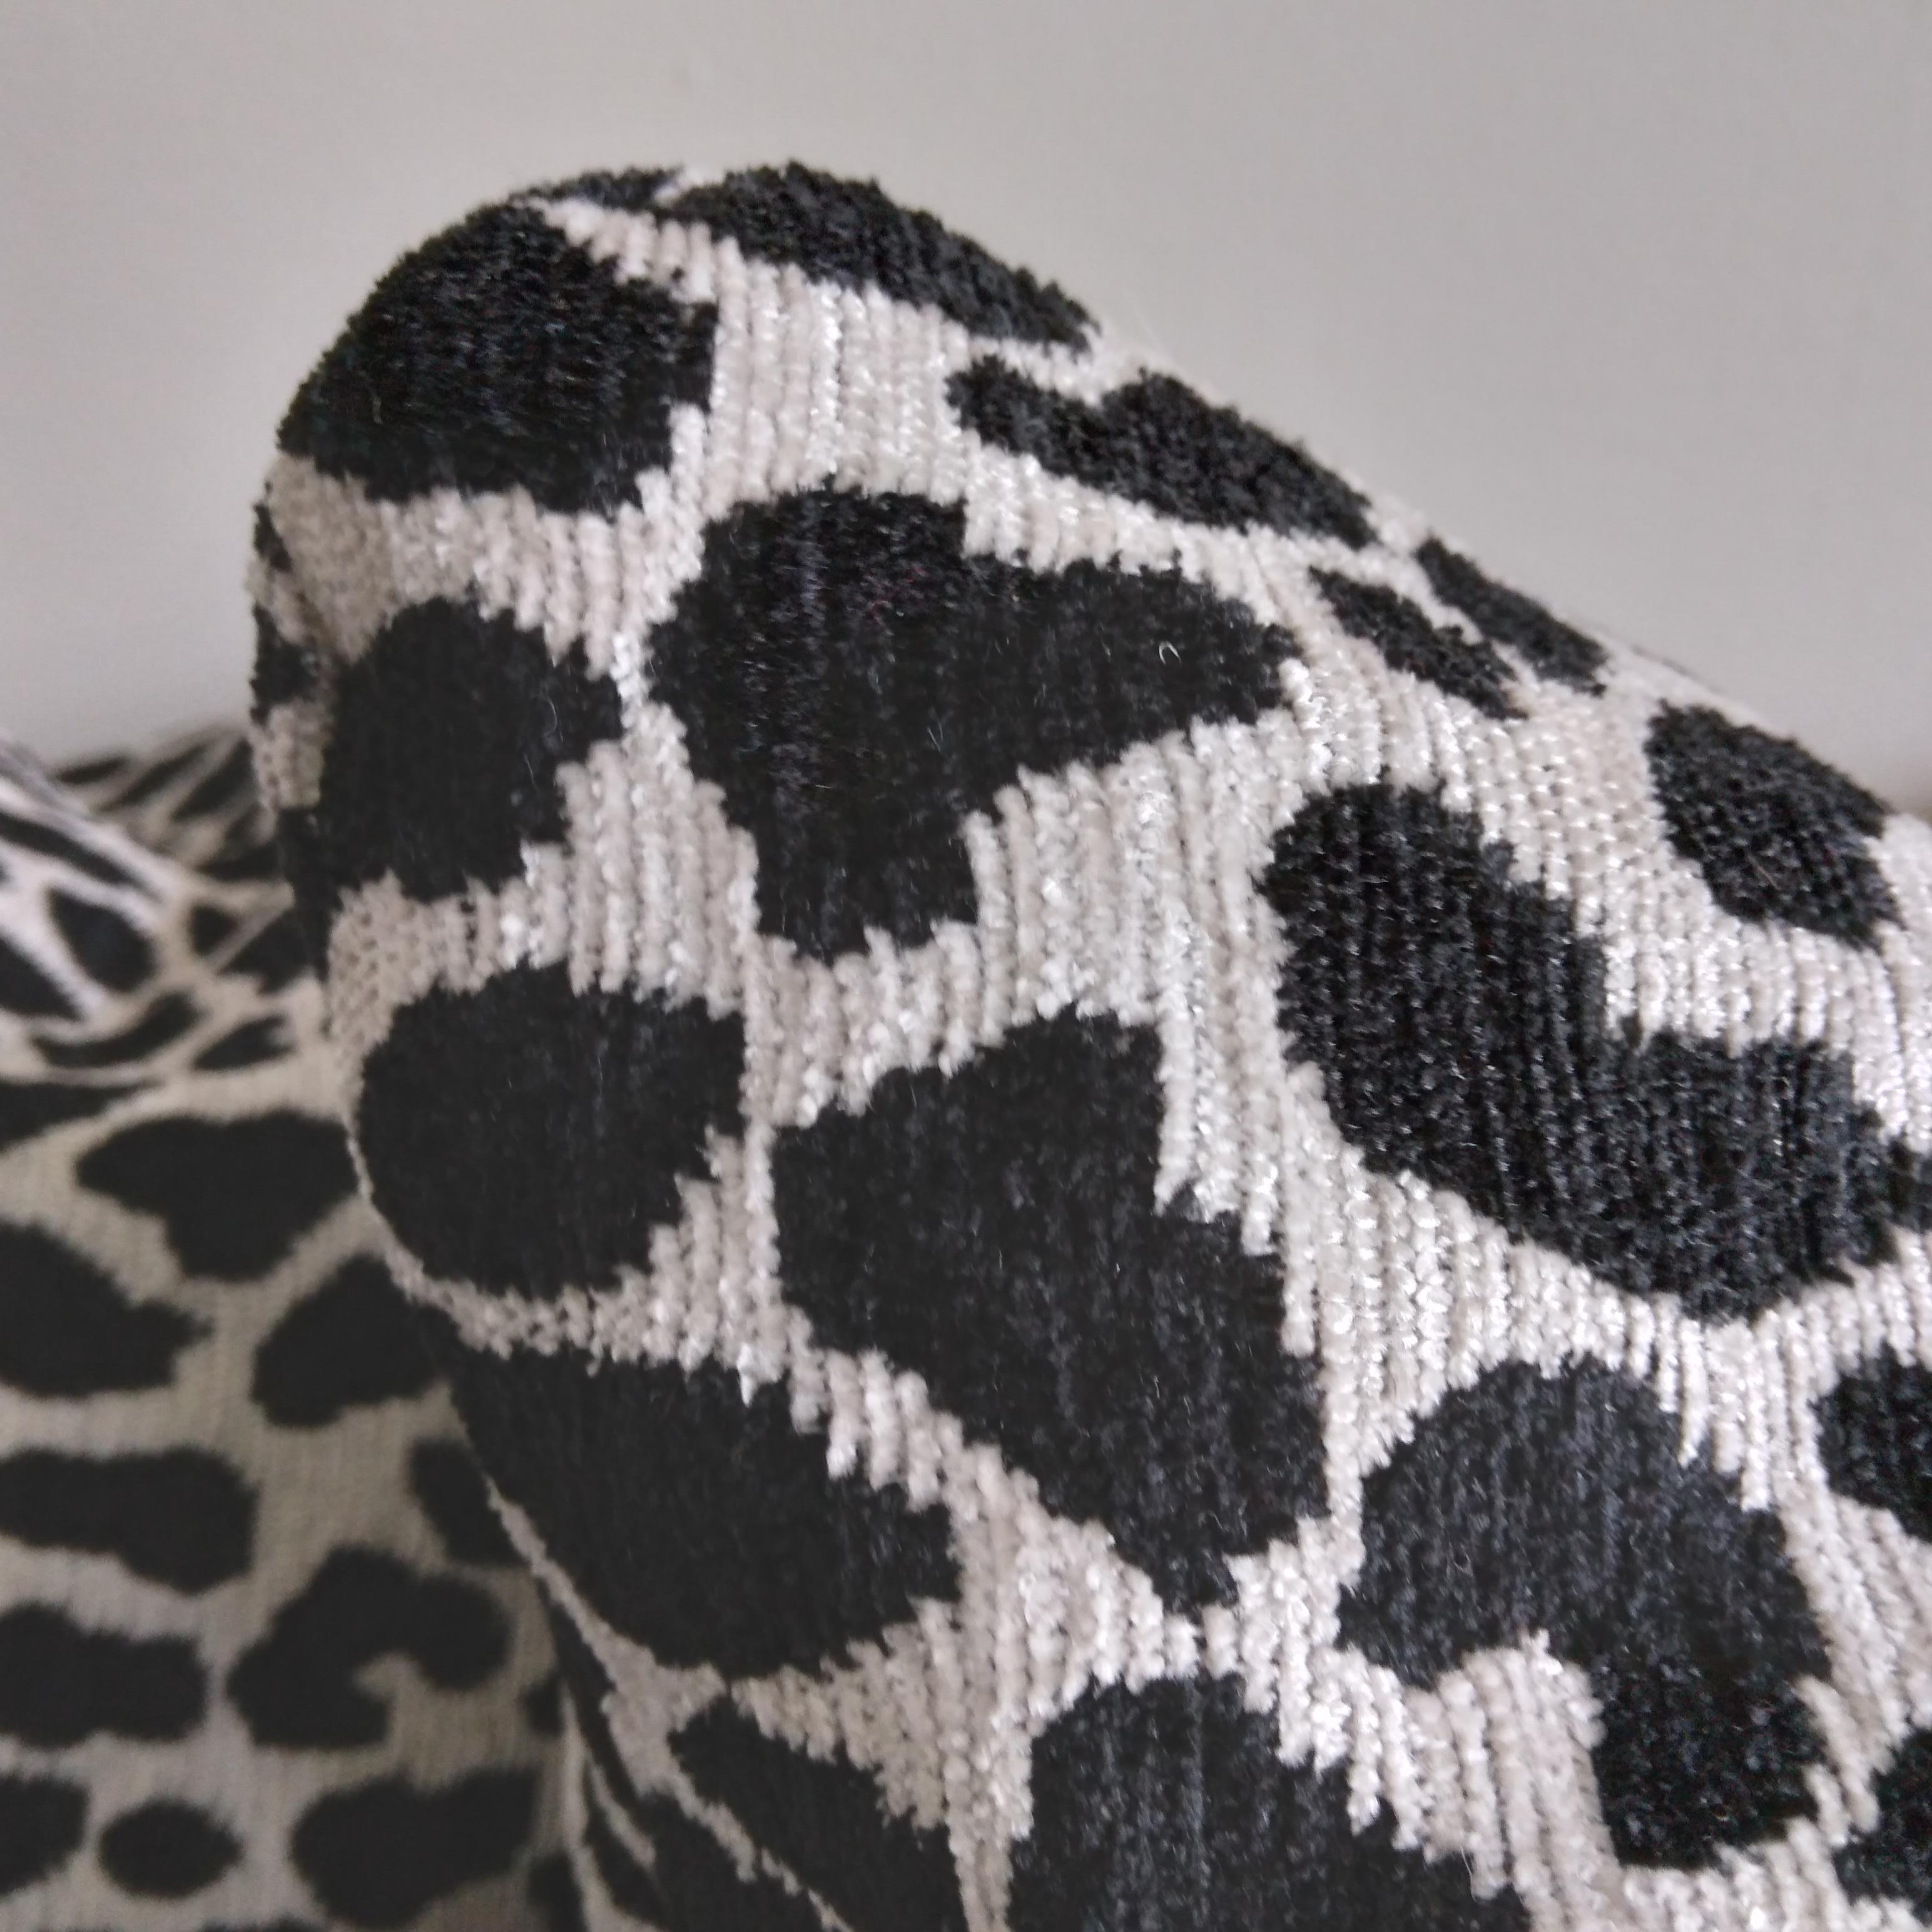 Bring a playful edge into your living spaces with these gorgeous accent pillows. We love the safari-inspired cheetah pattern and the lovely woven chenille texture. Classic black pairs with nearly-white silver in a sharp and eye-catching pattern. The